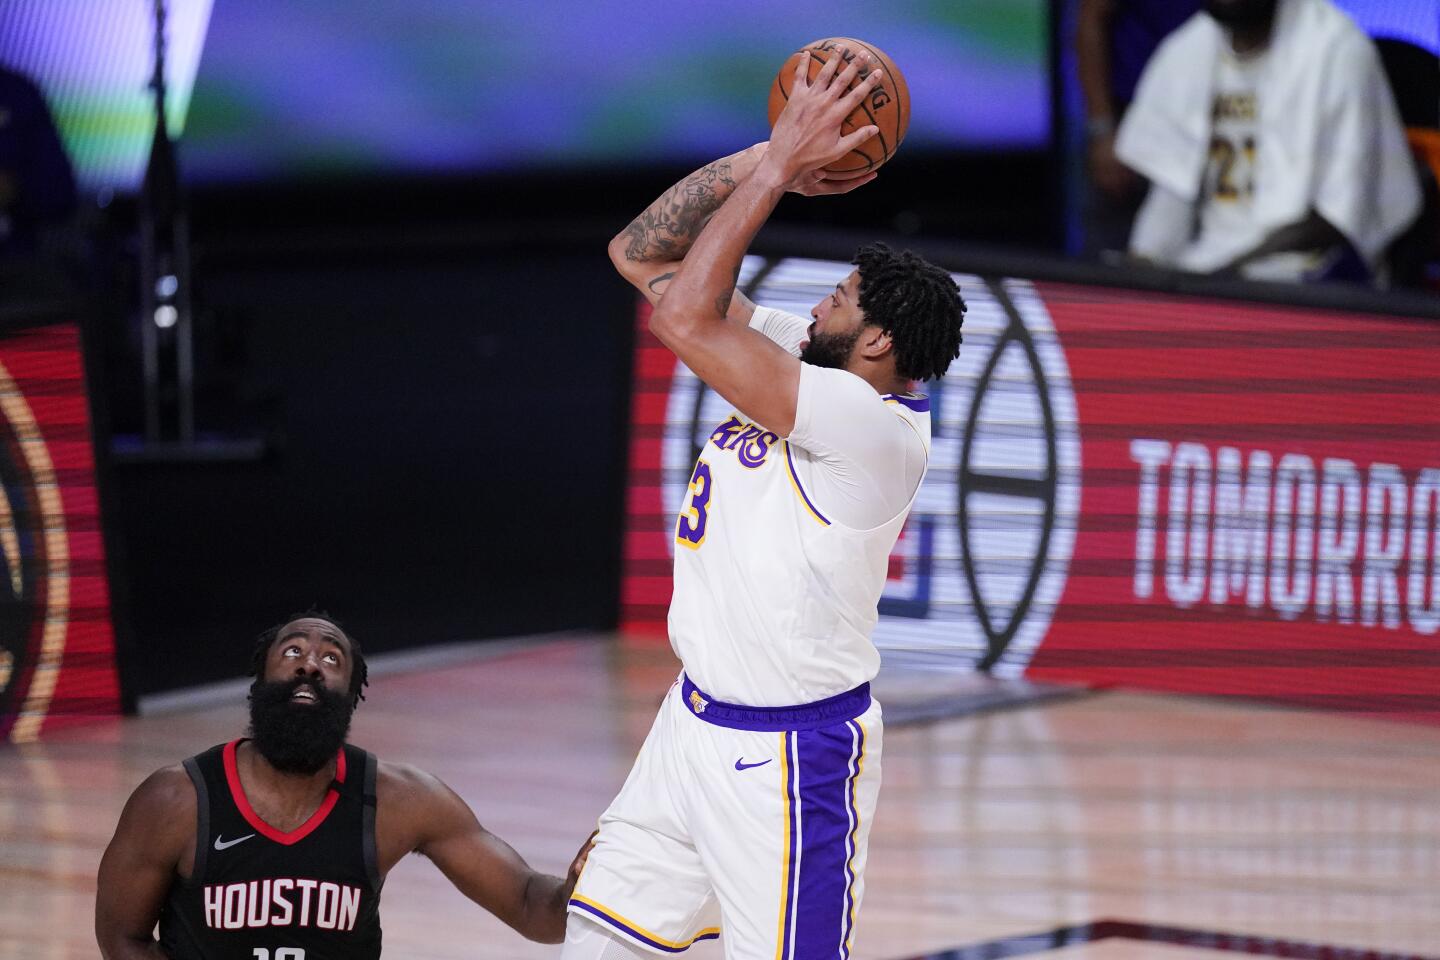 The Lakers' Anthony Davis shoots over the Rockets' James Harden in the first half of Game 5 on Saturday near Orlando, Fla.